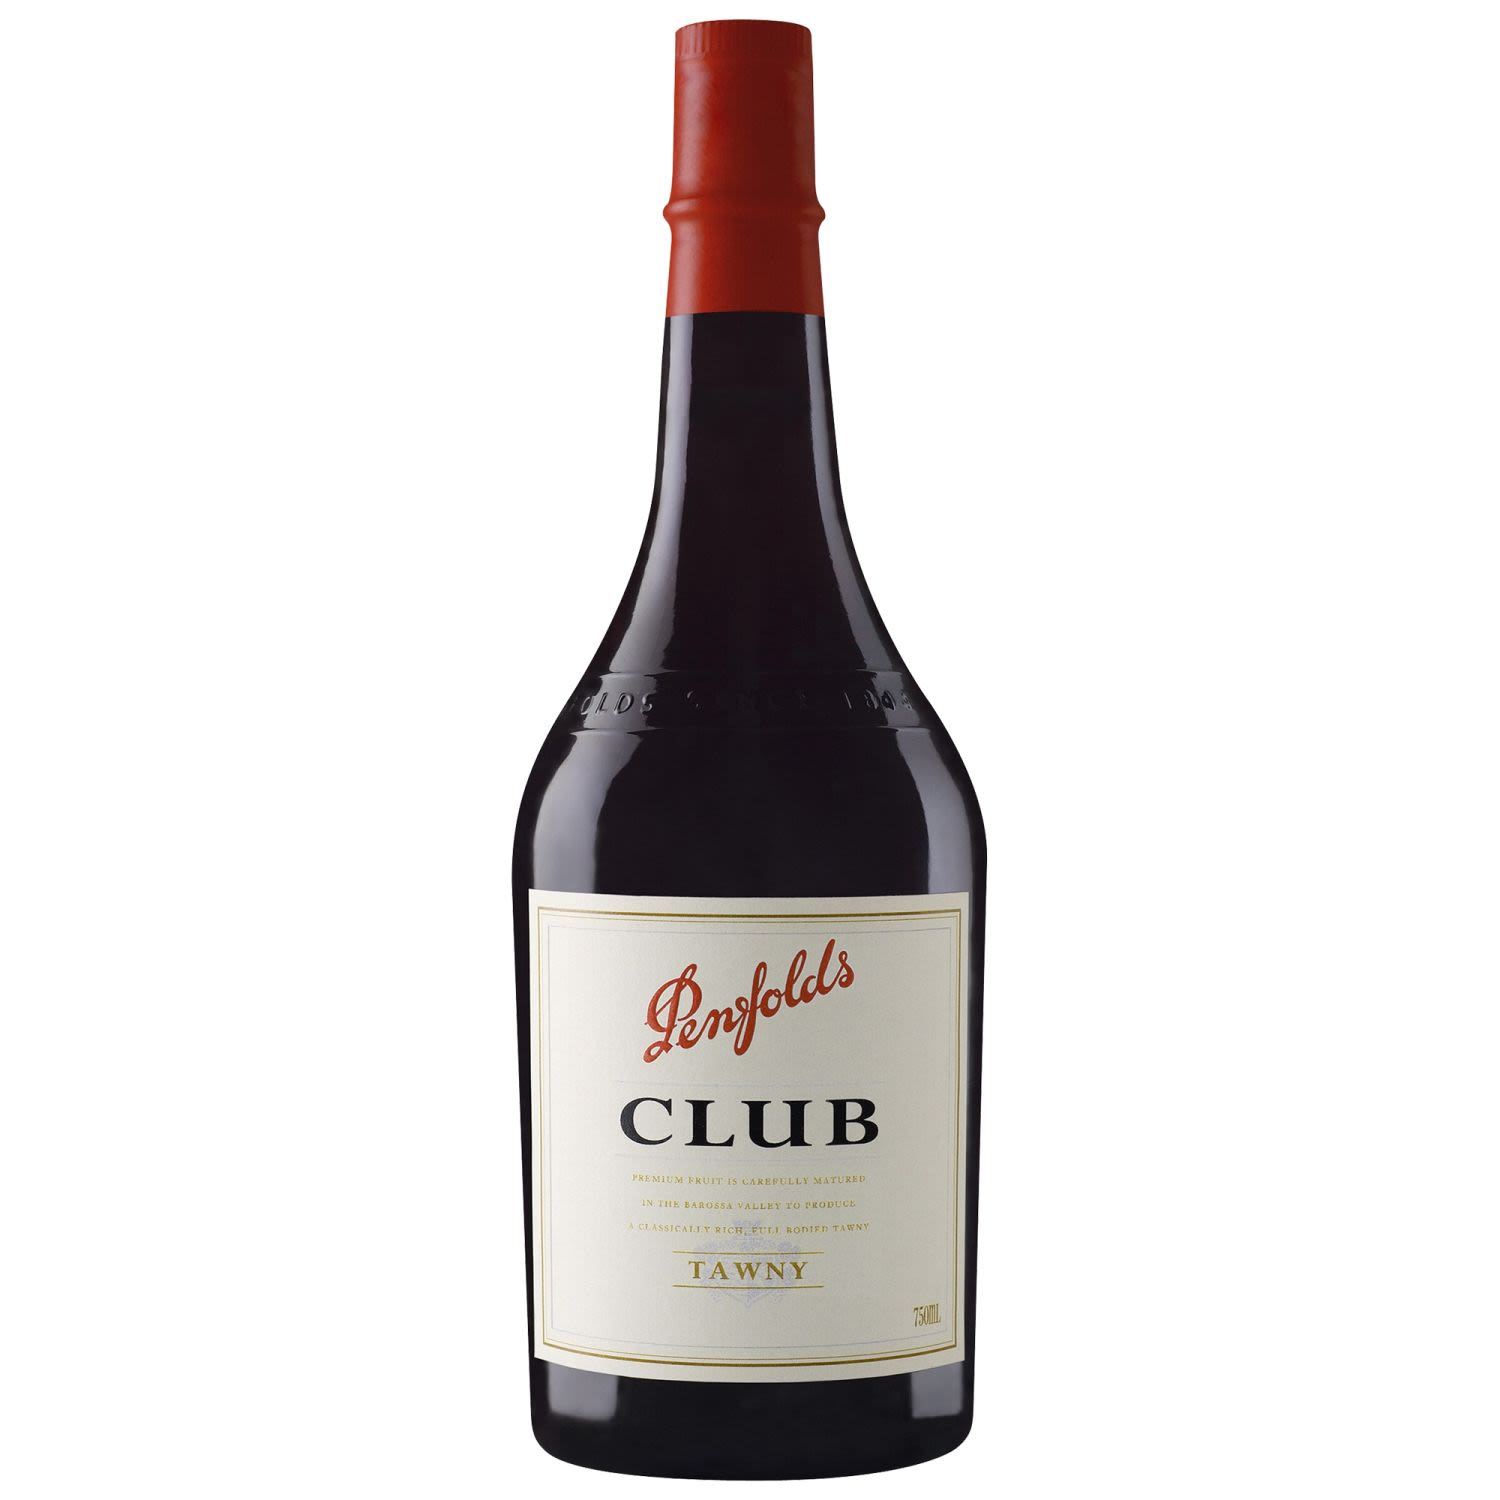 From the most iconic of all Australian producers, Penfolds Club Port is Australia's most loved Tawny noted for its mellowness and consistency of quality. Its a great blend of young barrel matured tawny aged in the Barossa Valley.<br /> <br />Alcohol Volume: 17.50%<br /><br />Pack Format: Bottle<br /><br />Standard Drinks: 10.4</br /><br />Pack Type: Bottle<br /><br />Country of Origin: Australia<br /><br />Region: South Australia<br /><br />Vintage: Non Vintage<br />